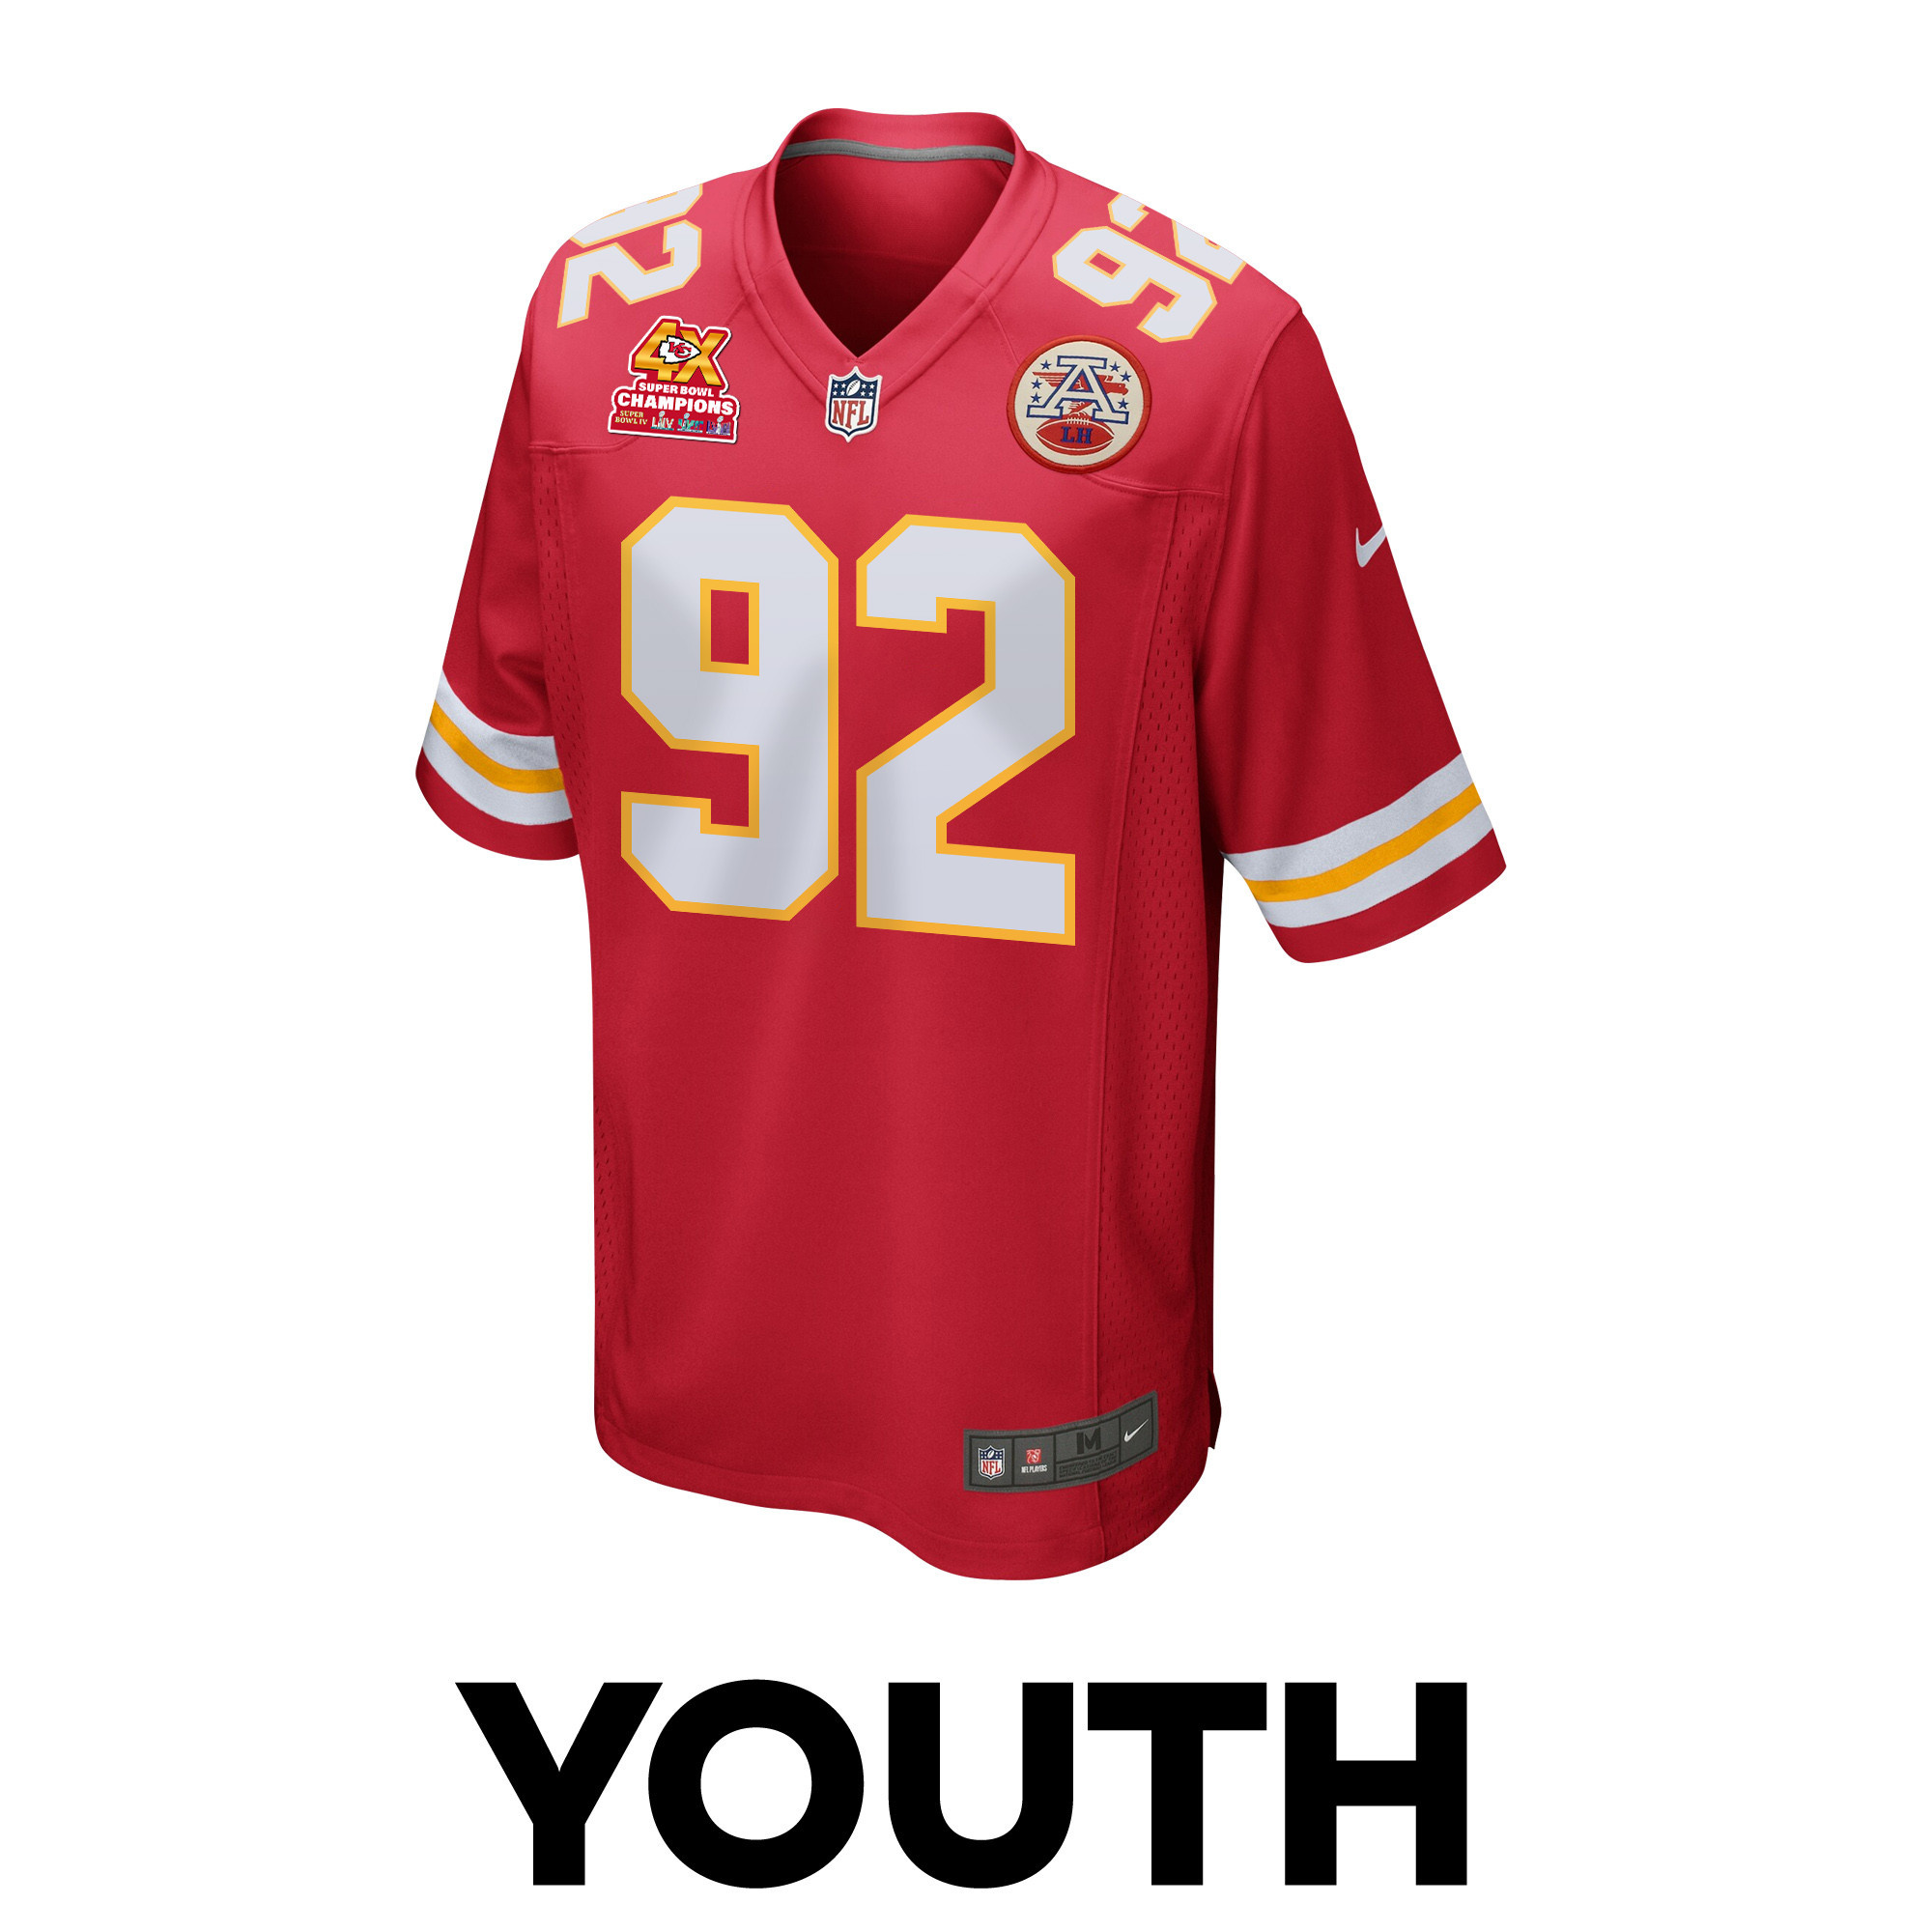 Neil Farrell 92 Kansas City Chiefs Super Bowl LVIII Champions 4X Game YOUTH Jersey - Red